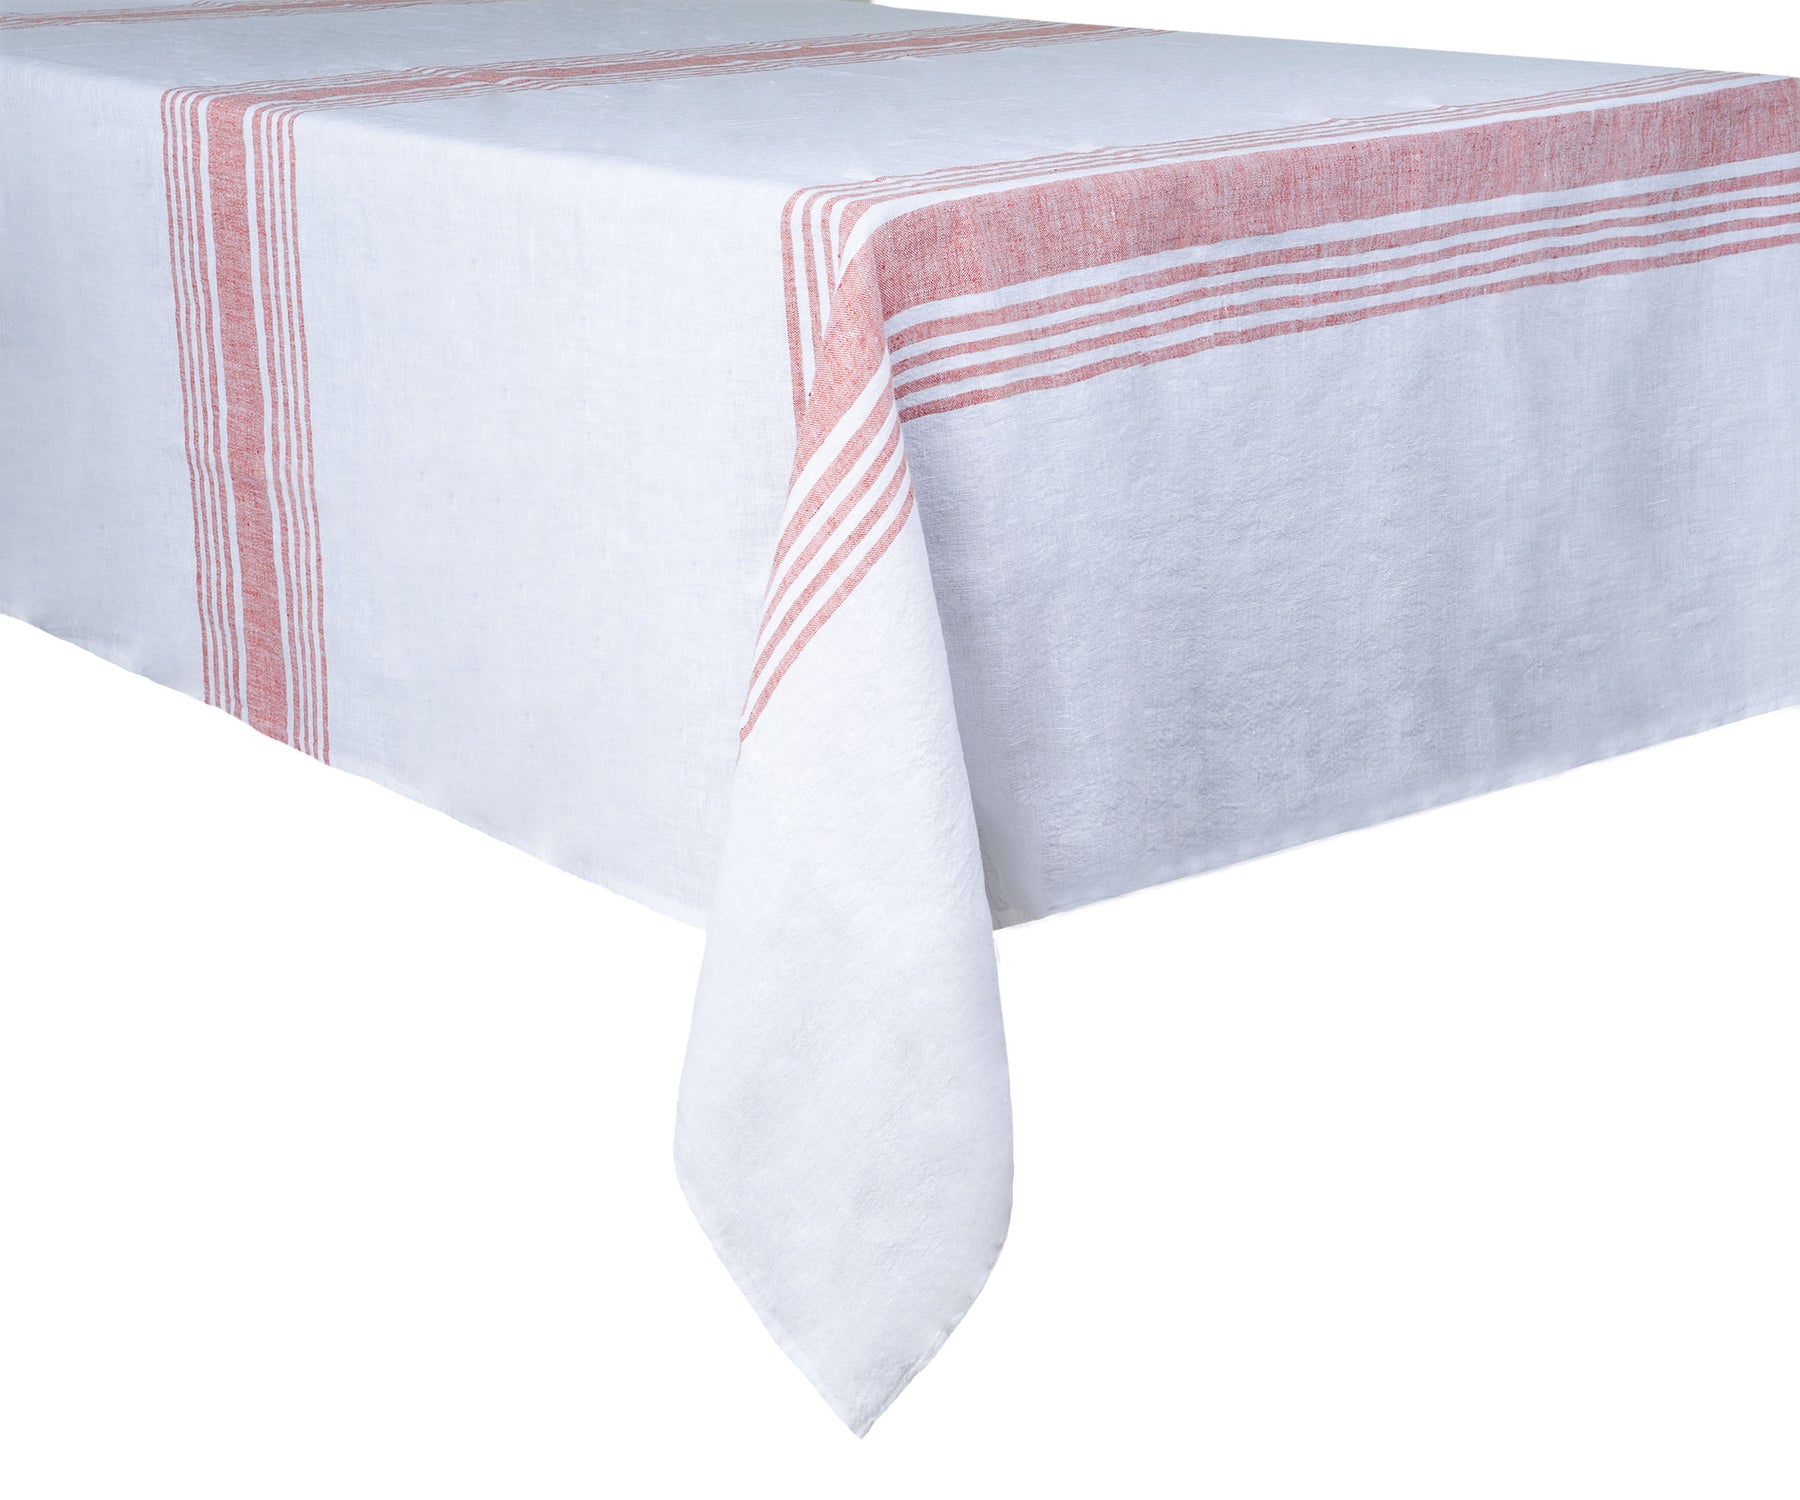 Pristine white linen tablecloth spread on a dining table